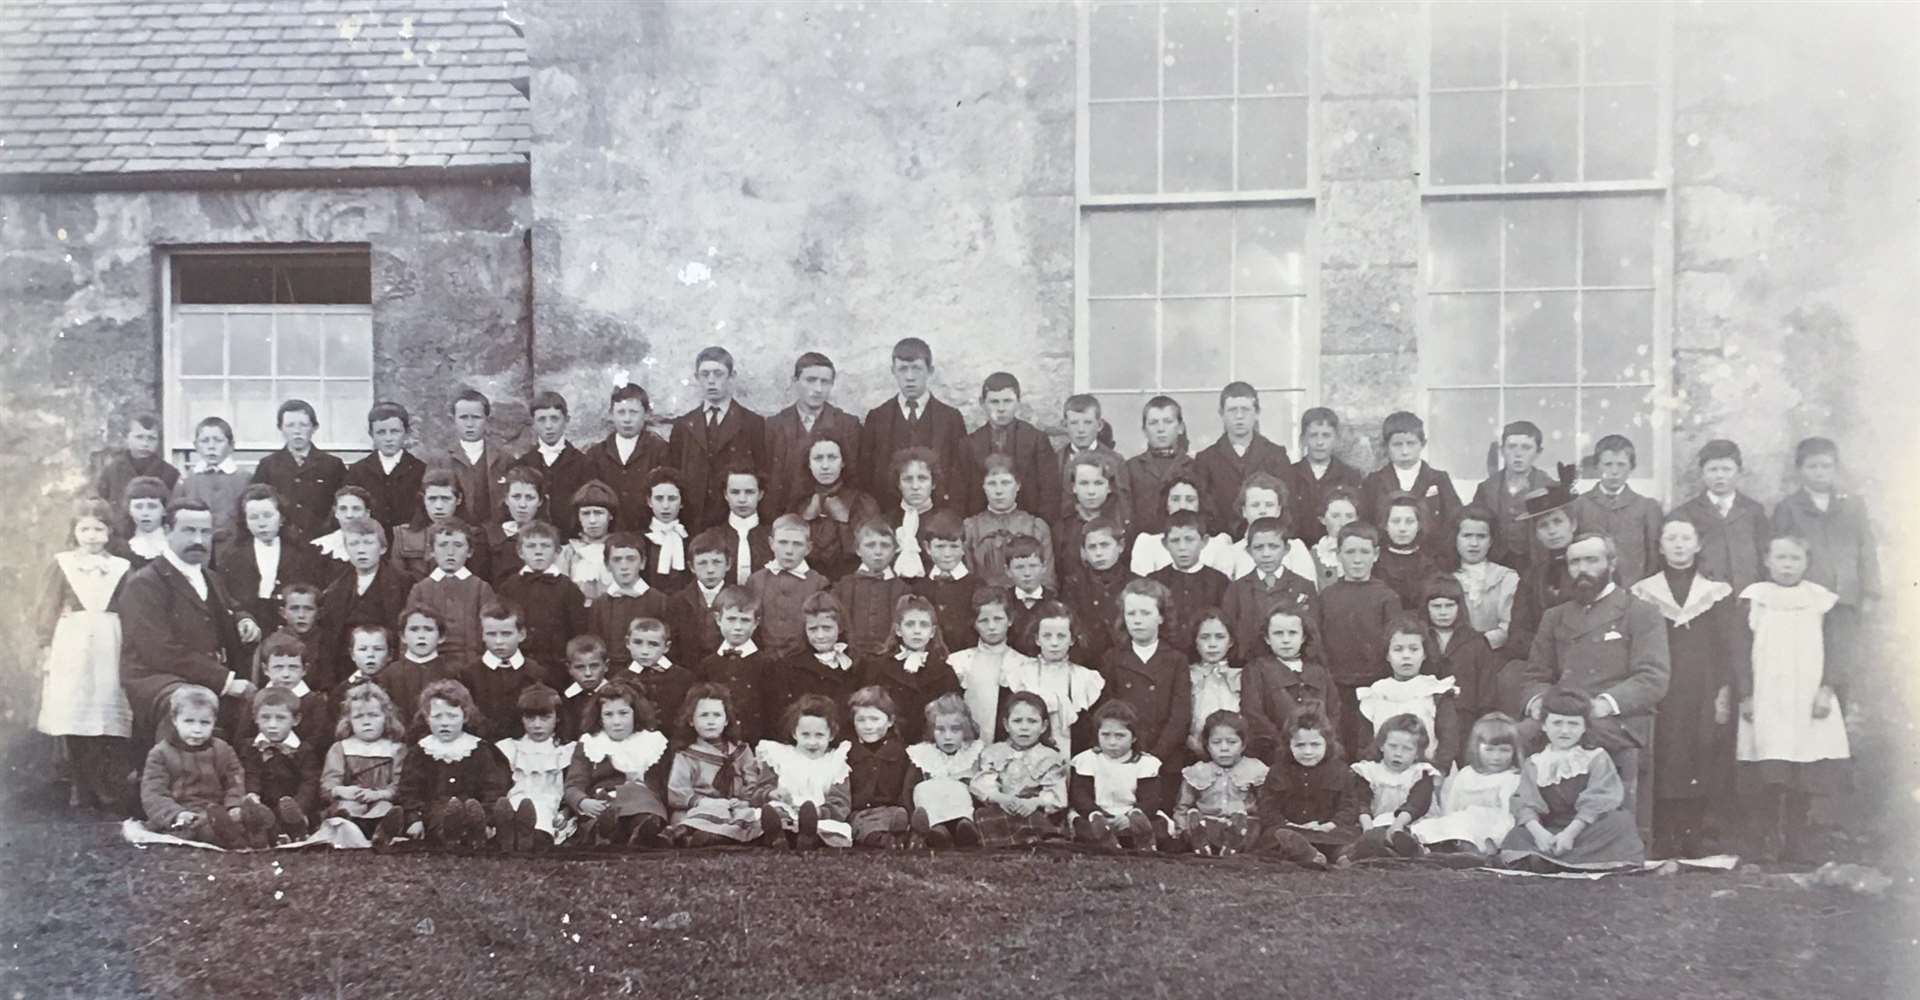 Clyne School photograph, undated. Pic: Highland Archive Centre